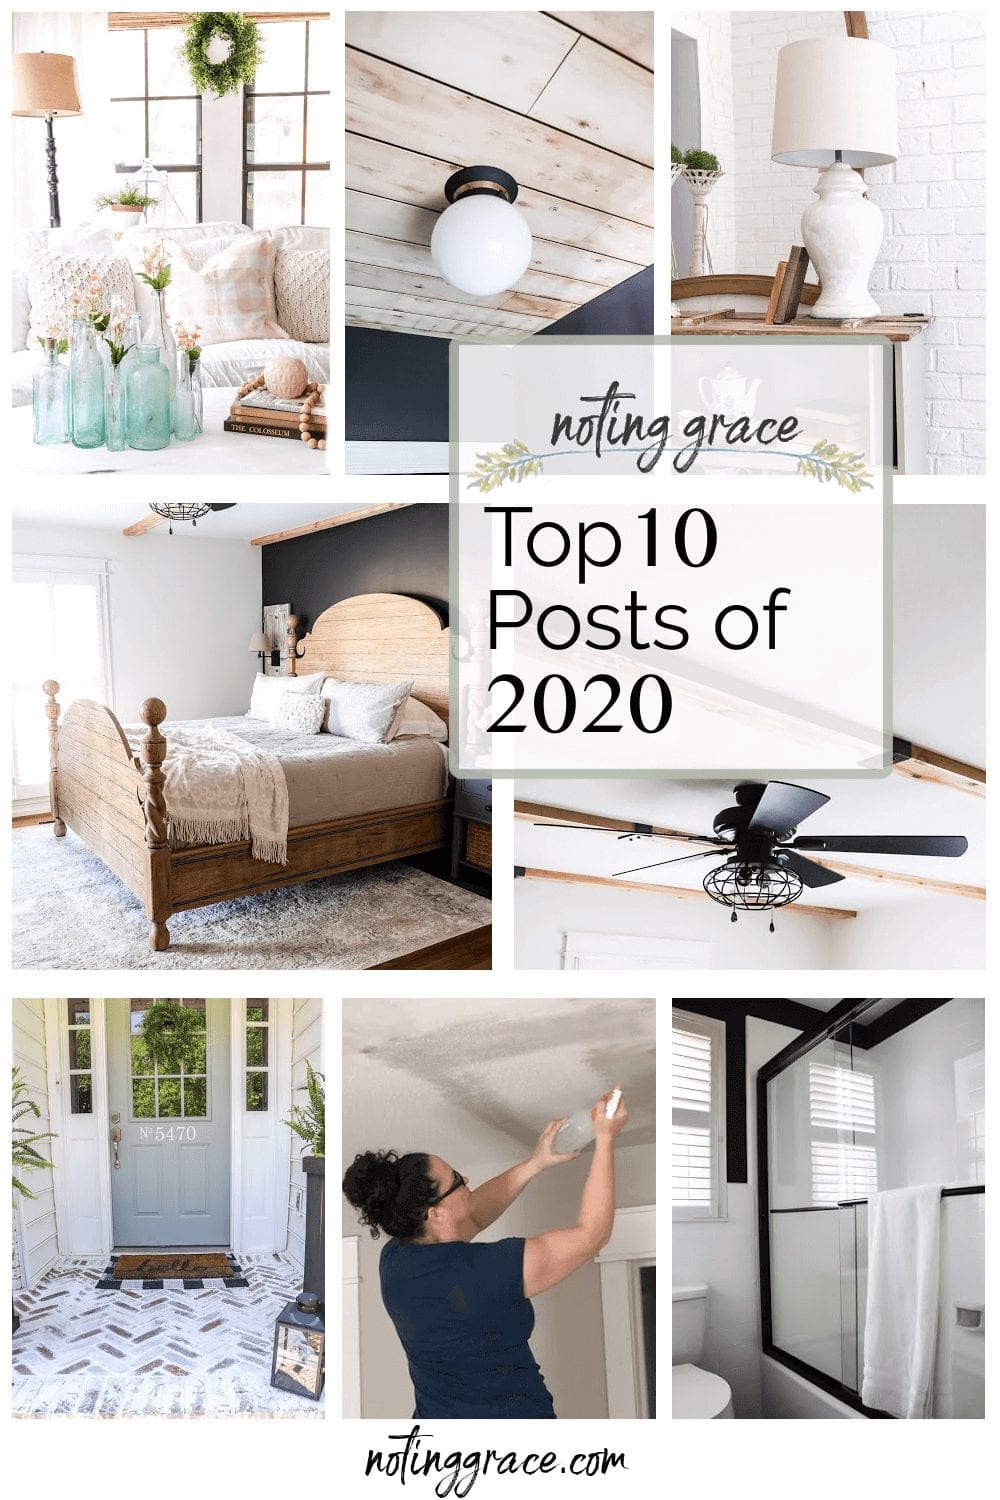 Welcome Home SUnday: Top 10 Posts of 2020